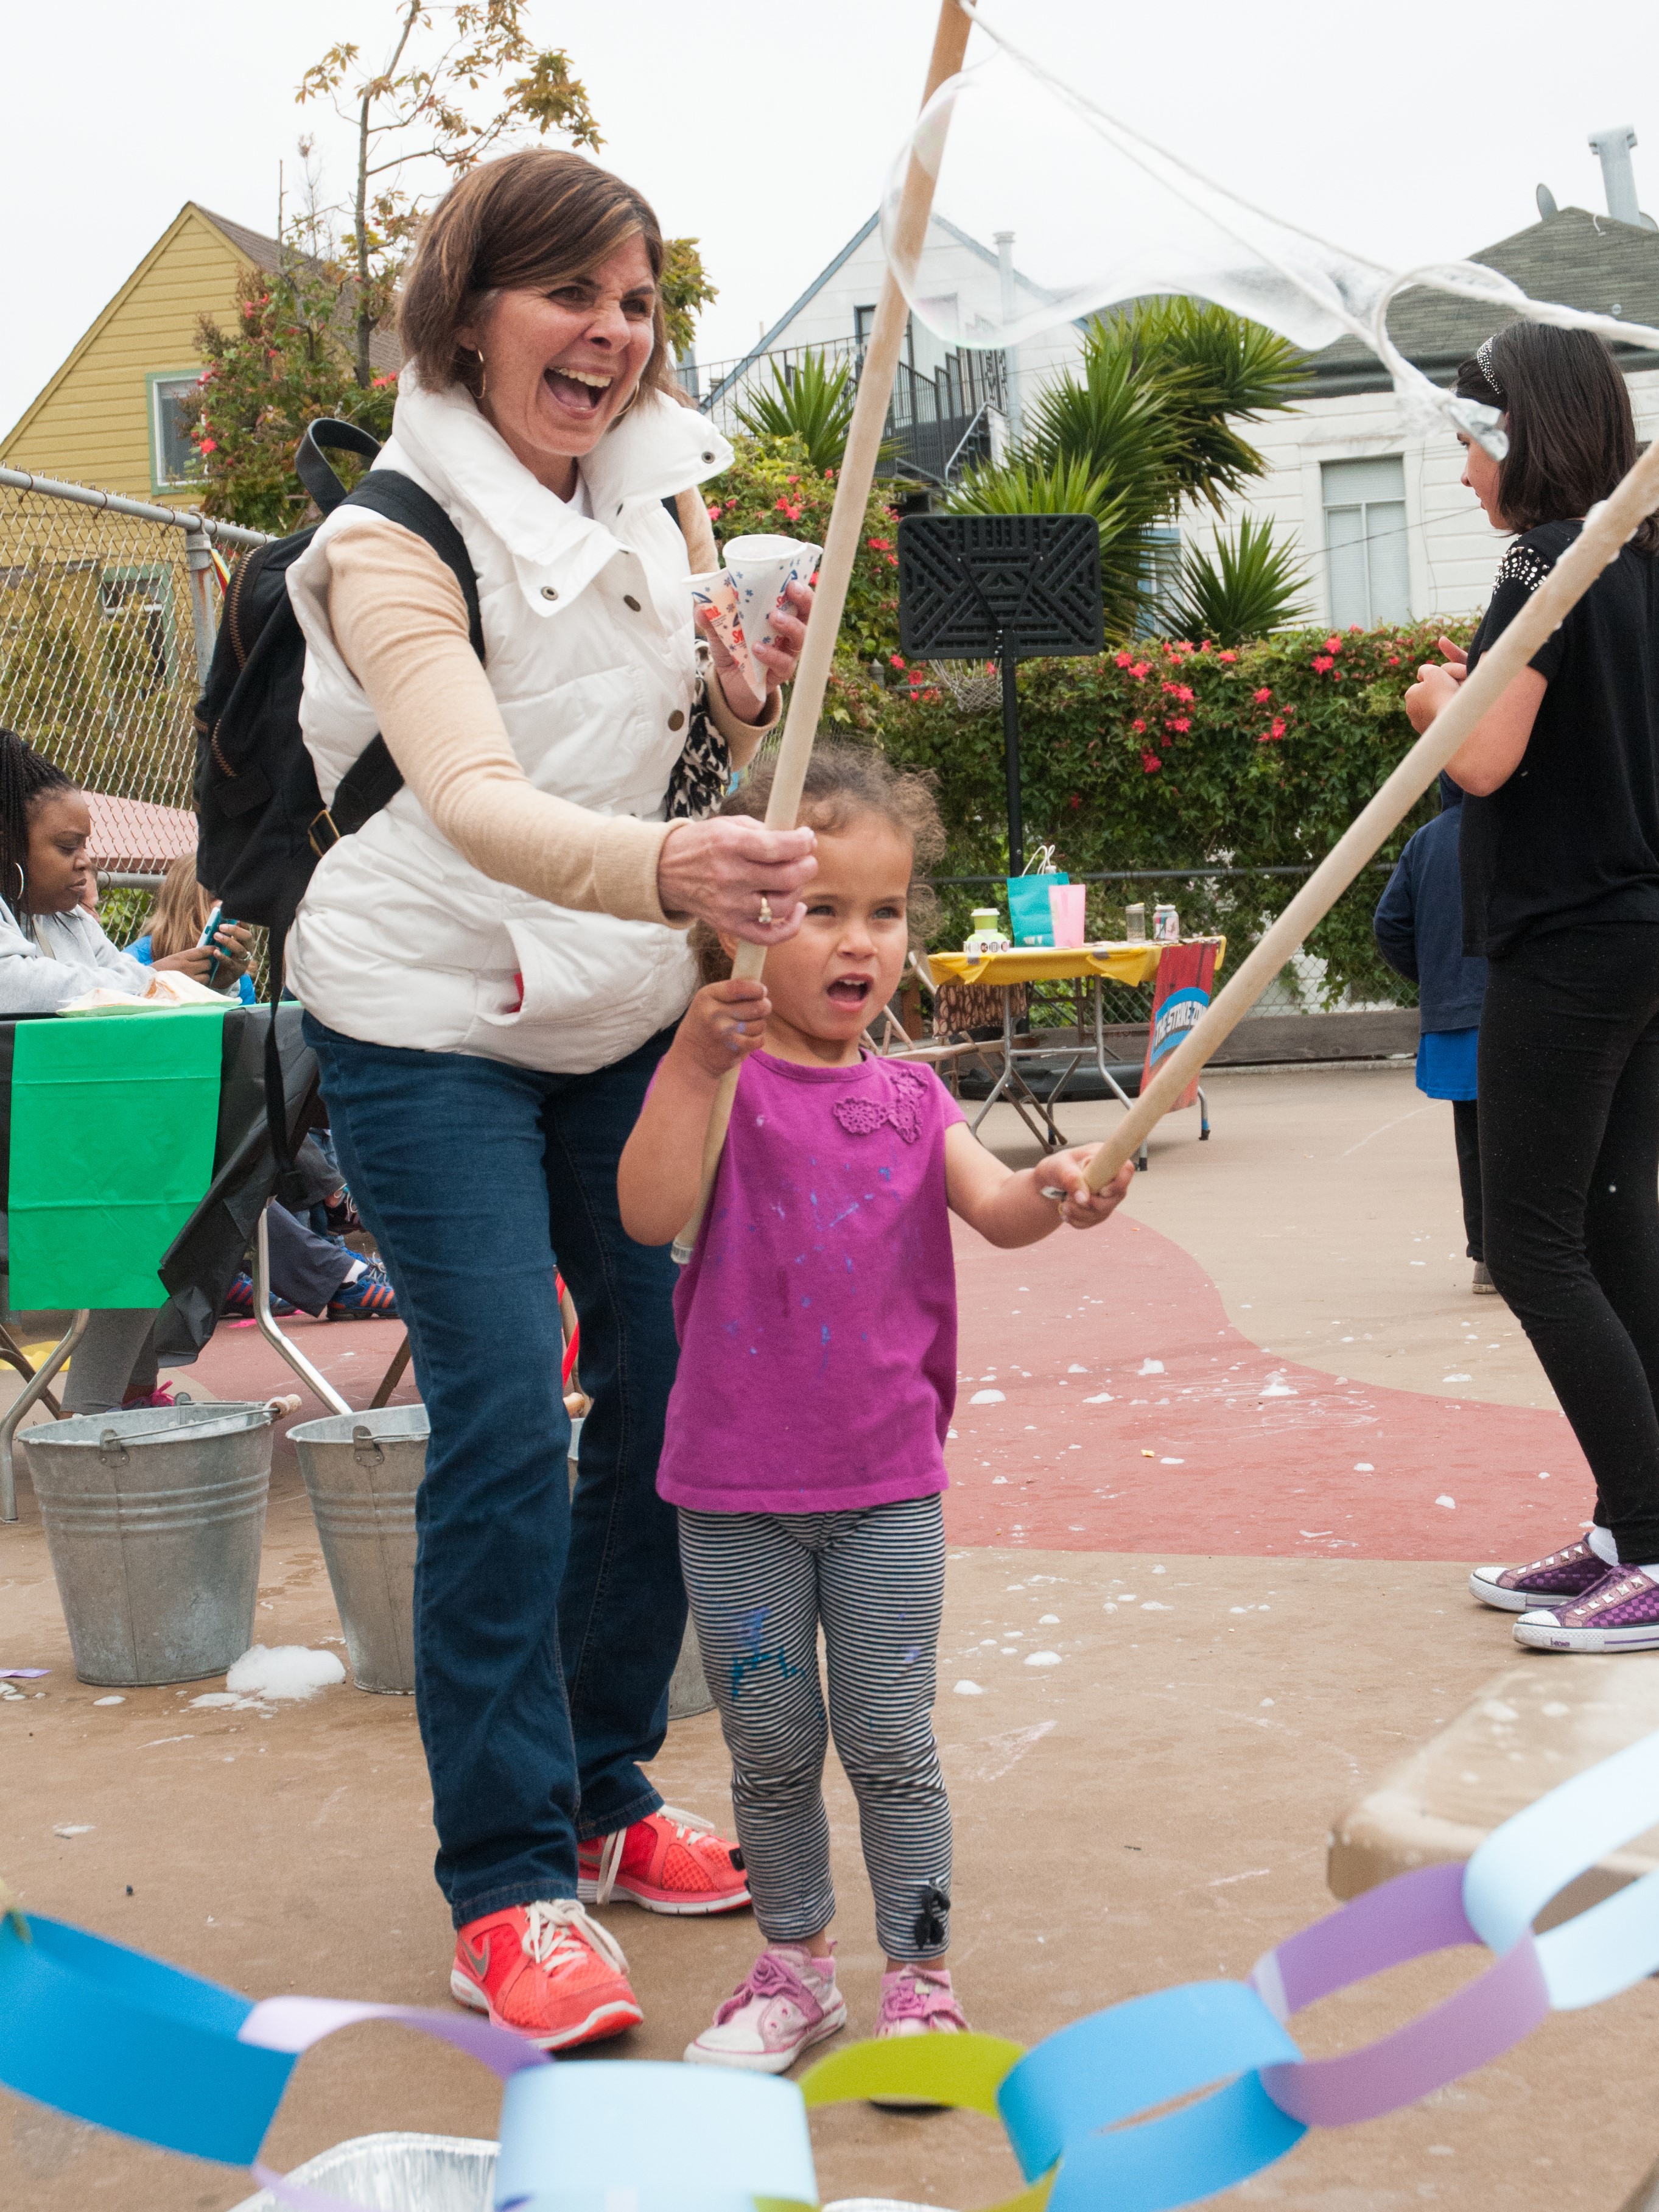 Mom and girl making giant bubbles at an outdoor school festival